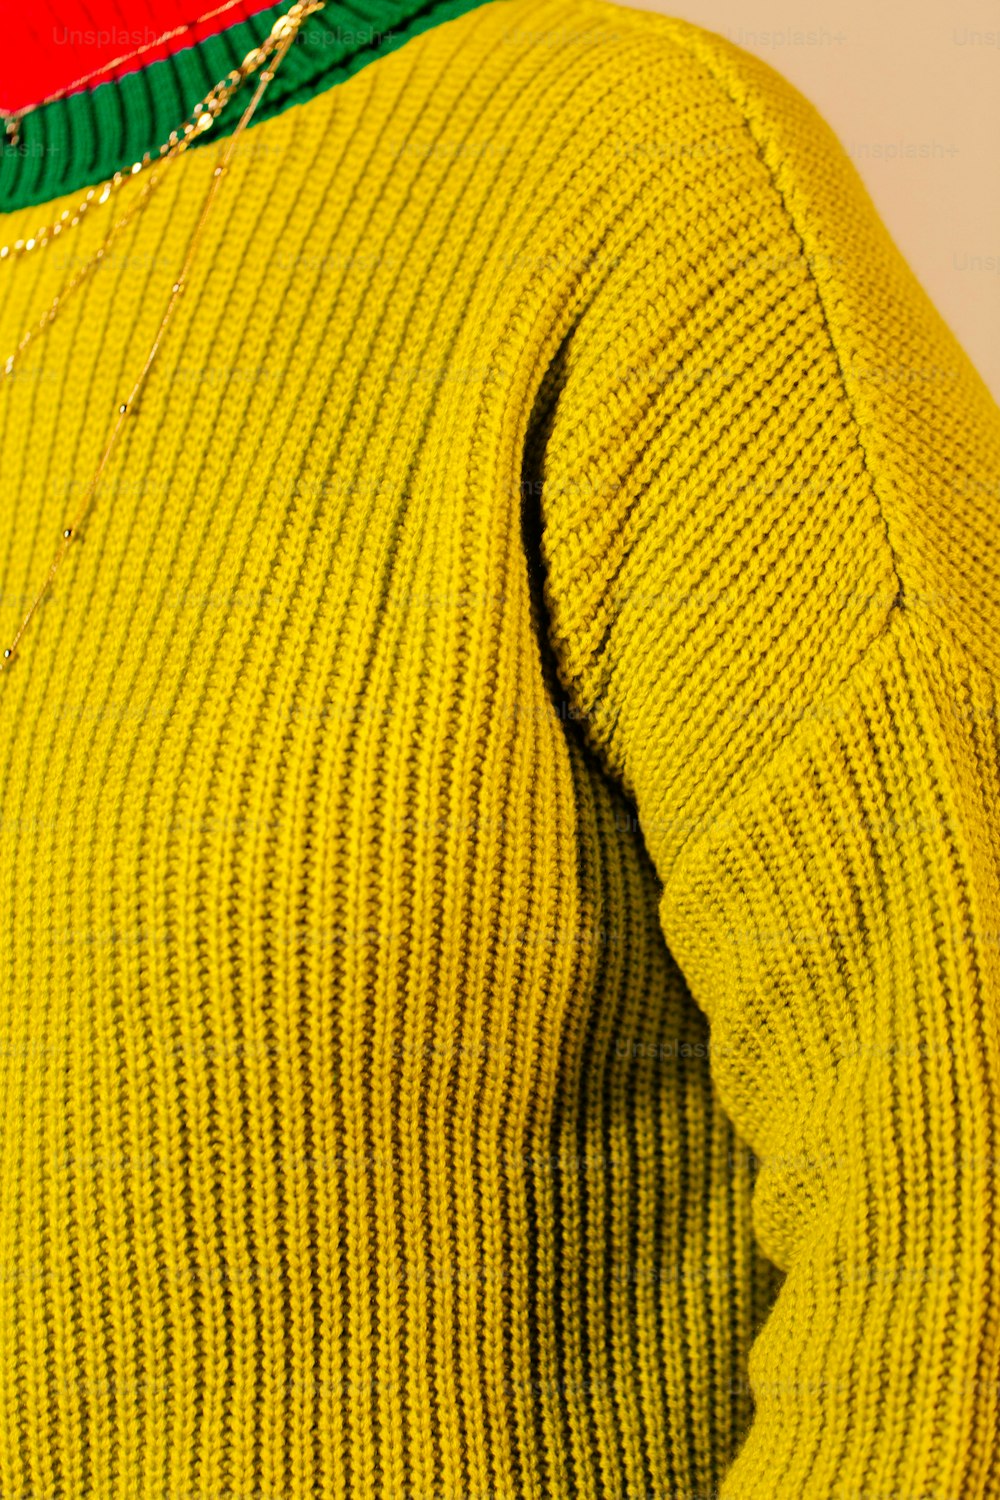 a close up of a person wearing a yellow sweater